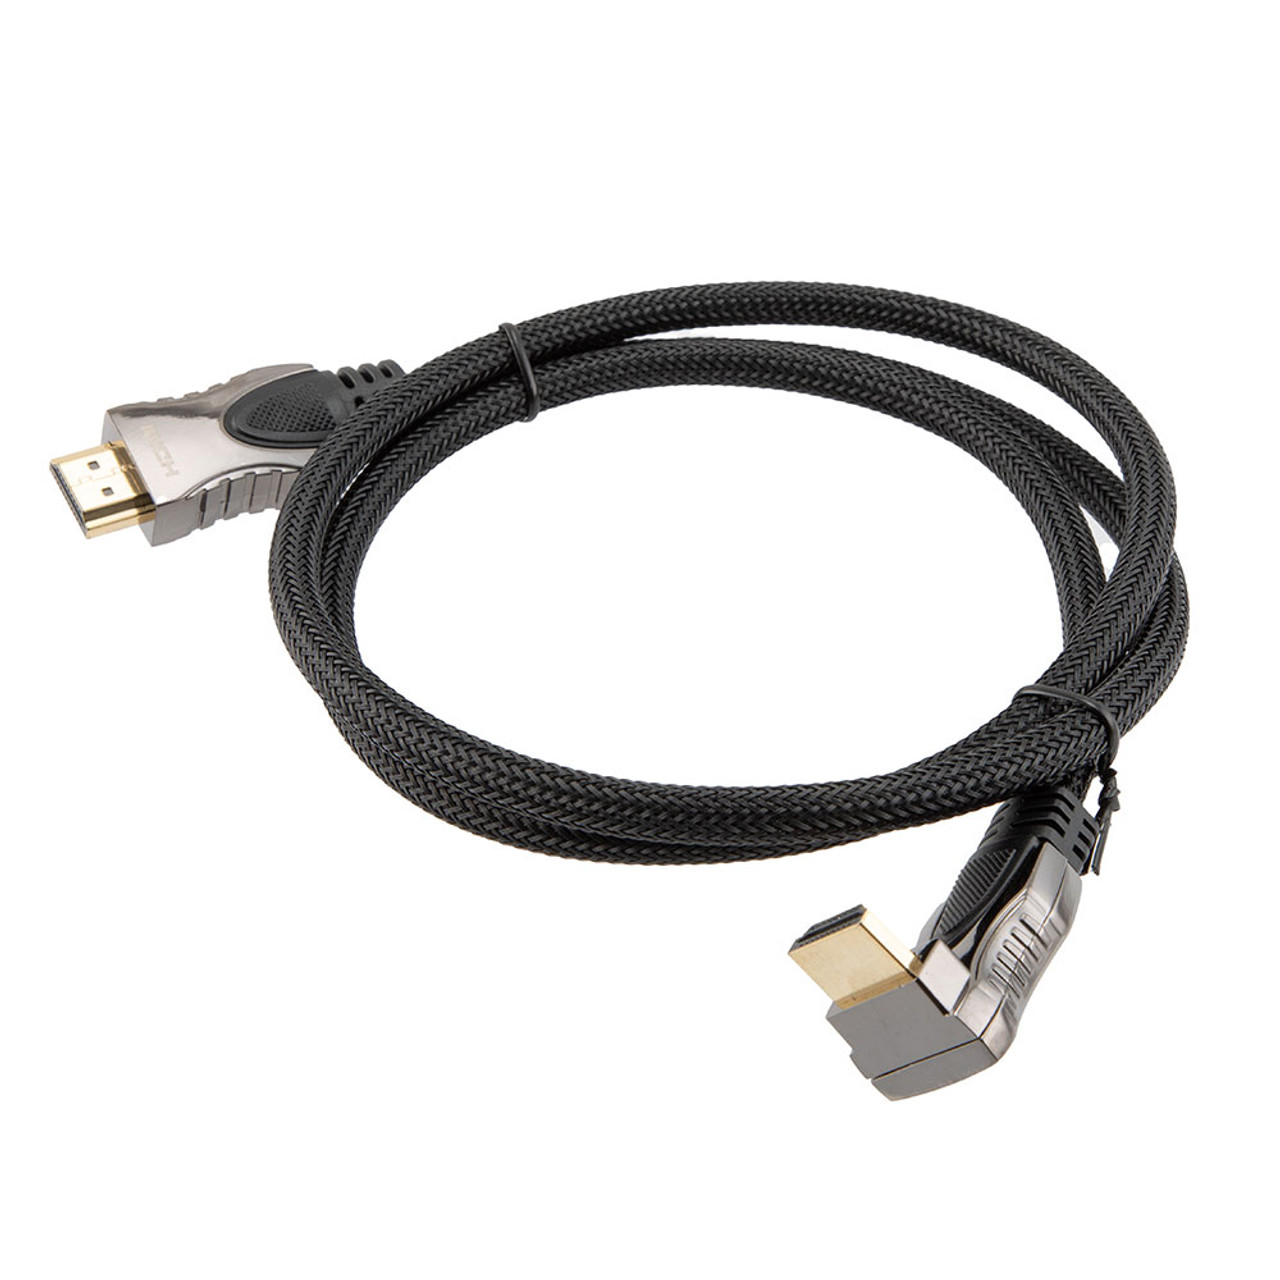 NavePoint HDMI 2.0 Male to Male Braided Cable, PVC with Nylon, Black, Zinc Alloy shell, Supports 4K @ 60Hz, Right Angle Straight to Right Angle Up, 1M